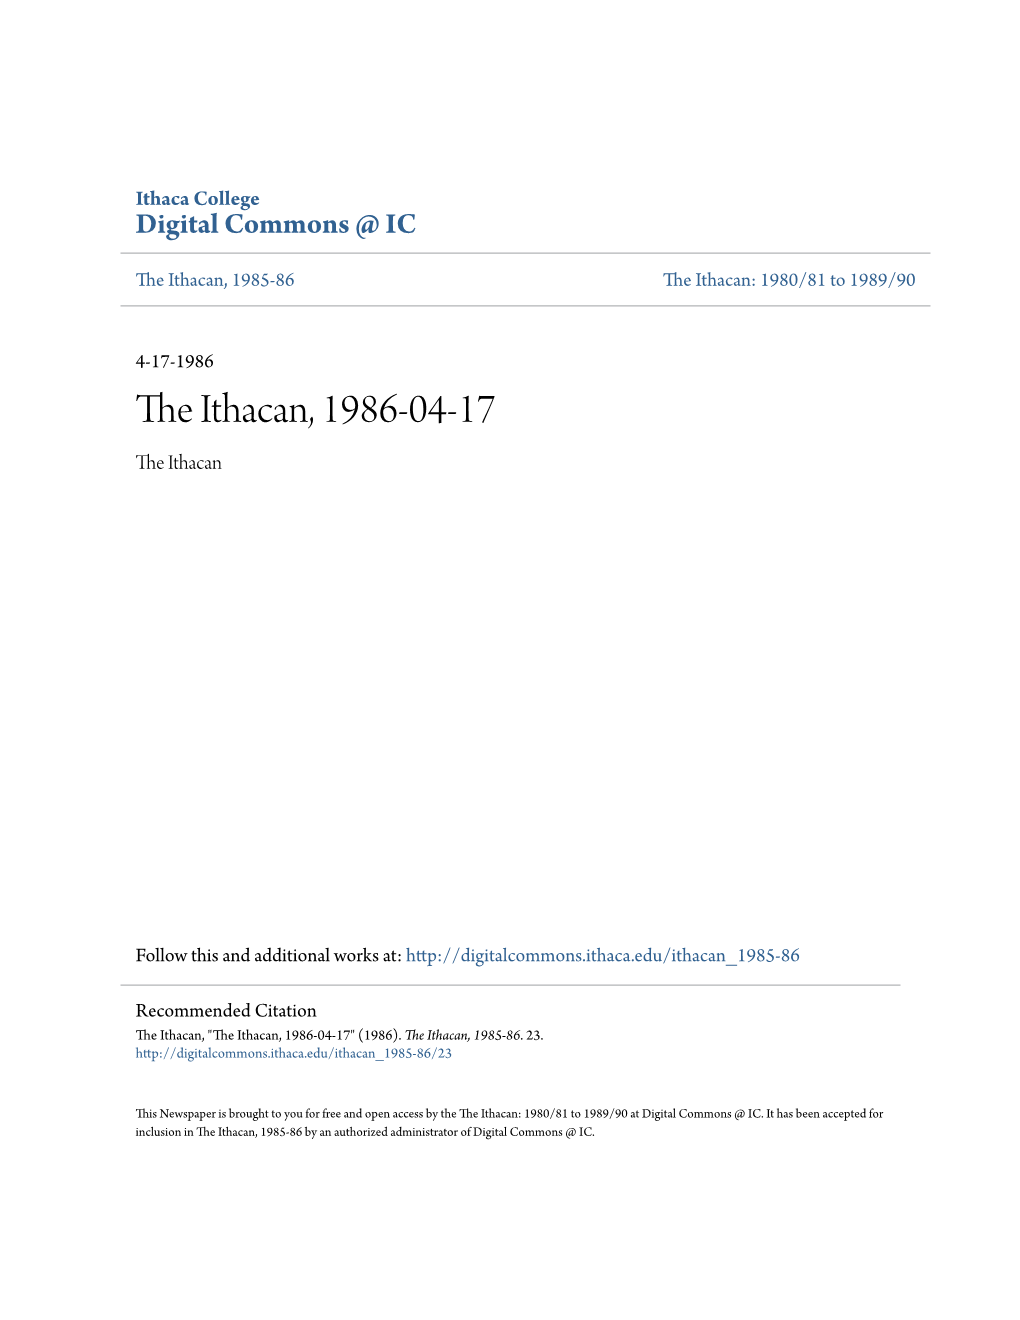 The Ithacan, 1986-04-17